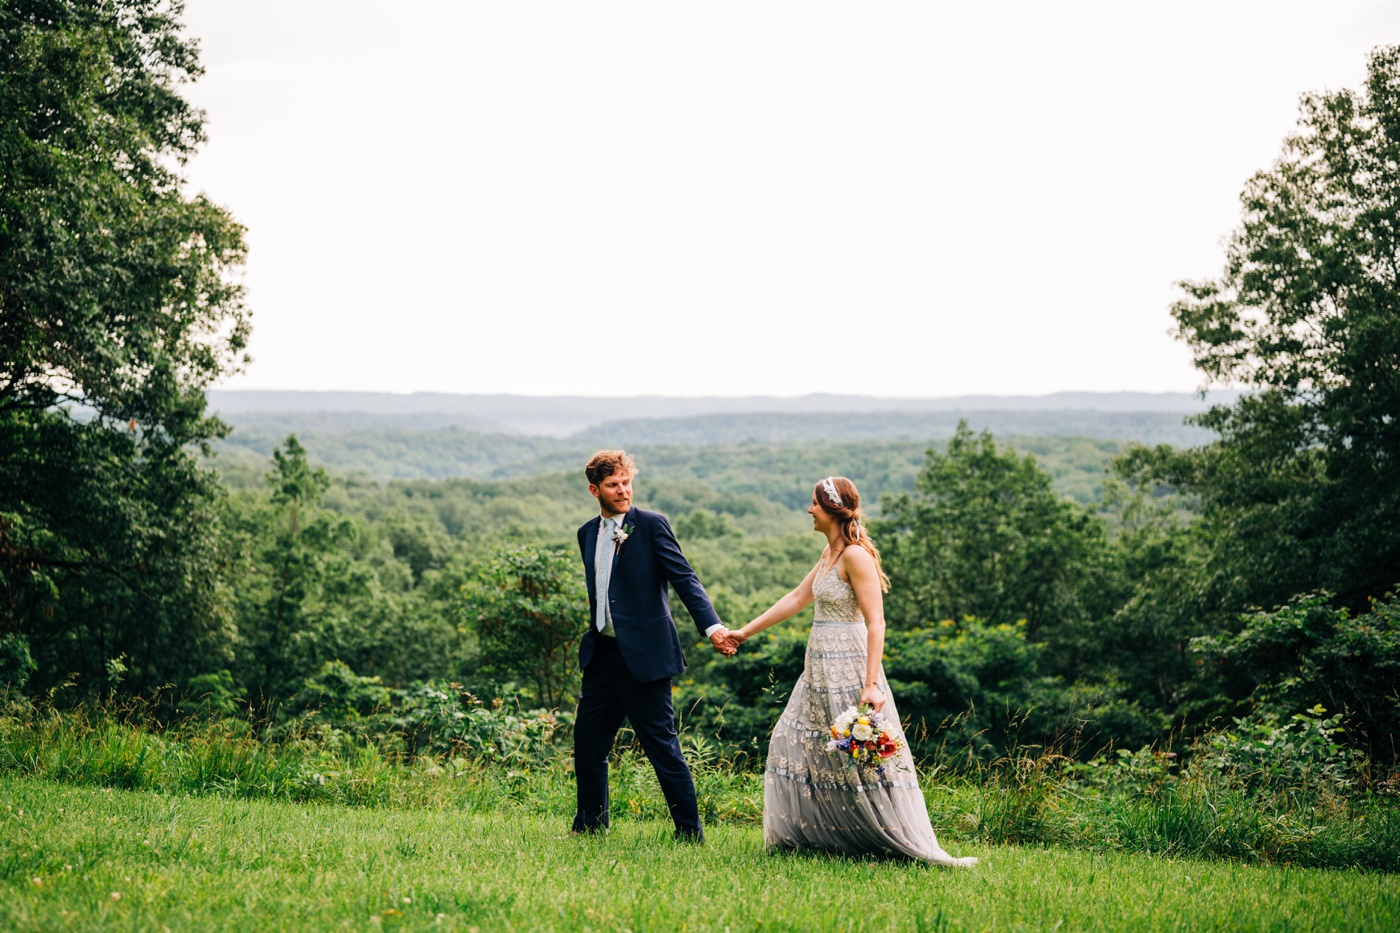 How to pick your wedding date in Indiana